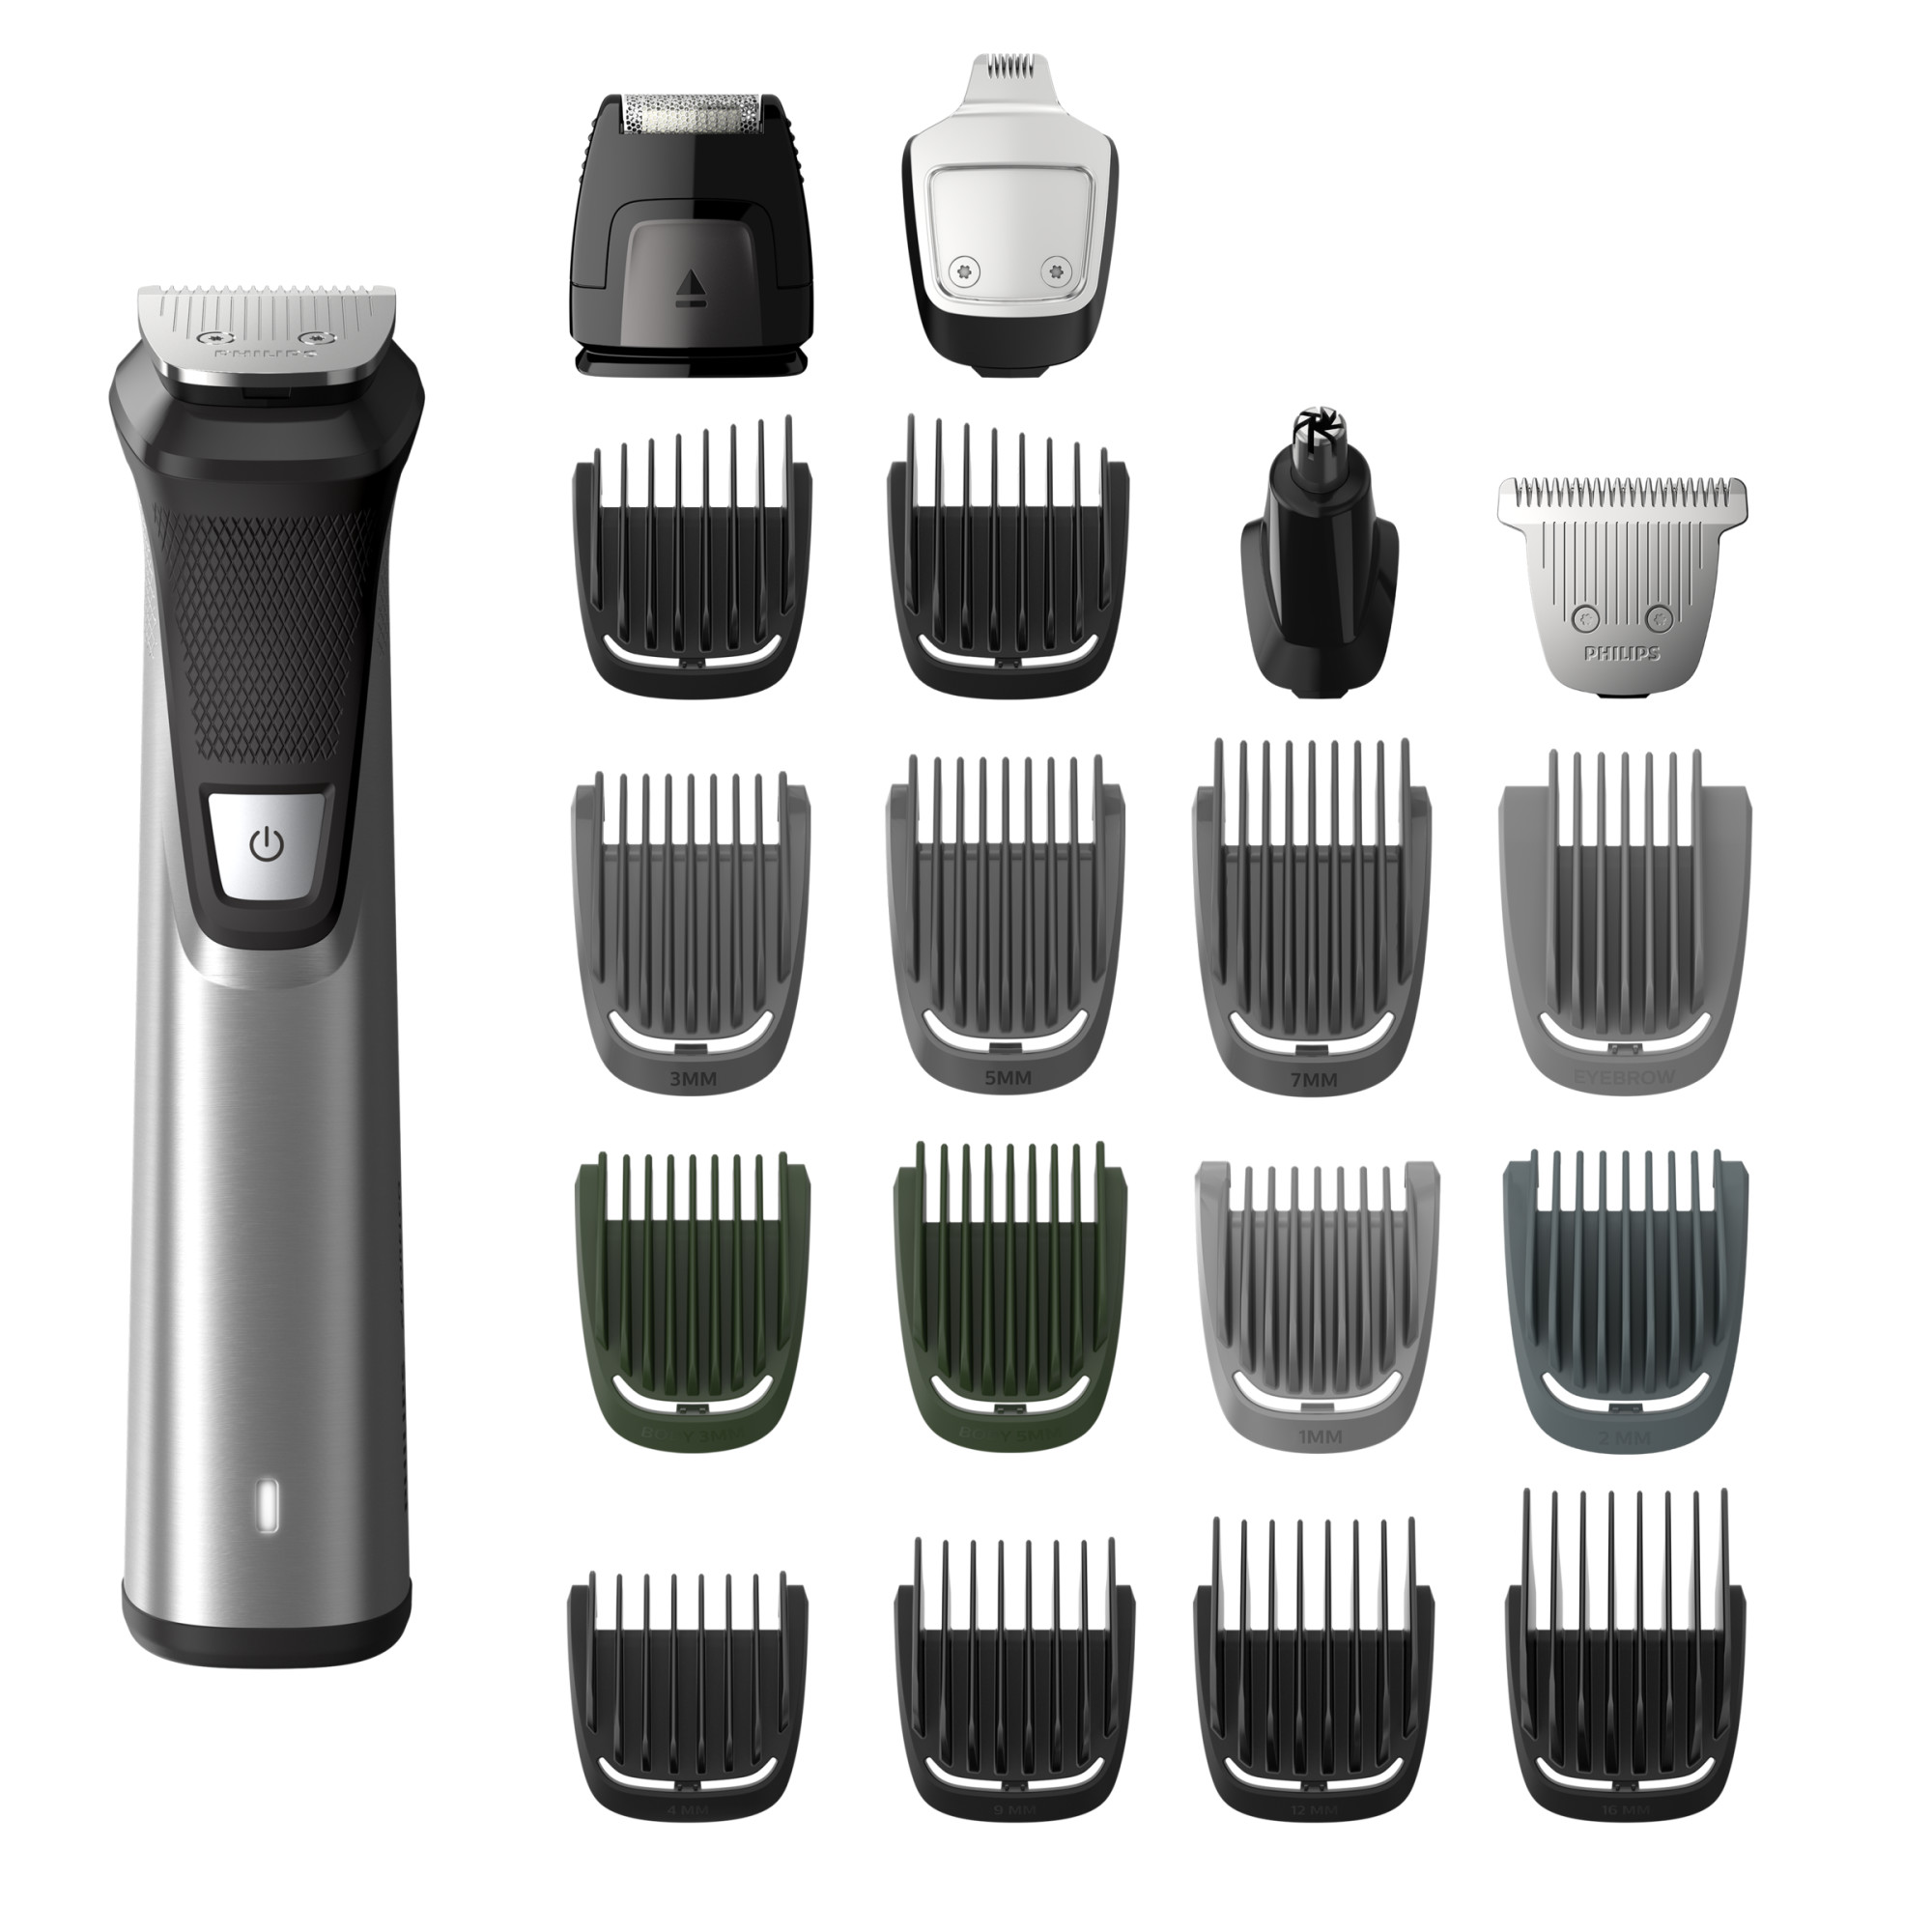 Philips Norelco Multigroom Series 7000 23 Piece Mens Grooming Kit, Trimmer For Beard, Head, Body, and Face - No Blade Oil Needed, MG7750/49 - image 1 of 21